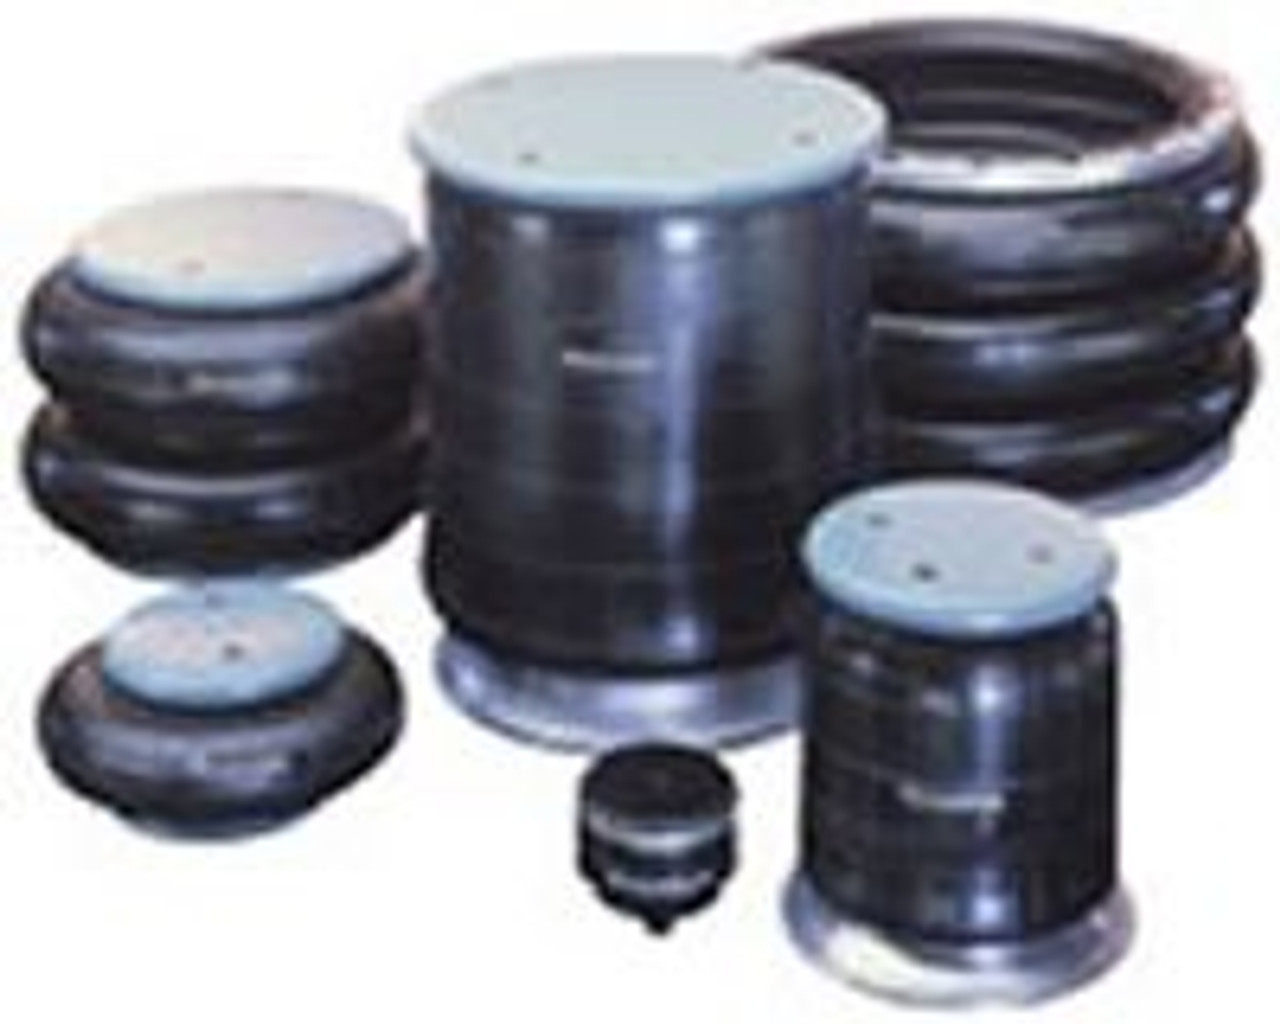 Firestone W013587669 143B Style Airspring, Type 4 Bead Rings, Includes 2 1/8" Bolts, Nuts & Washers